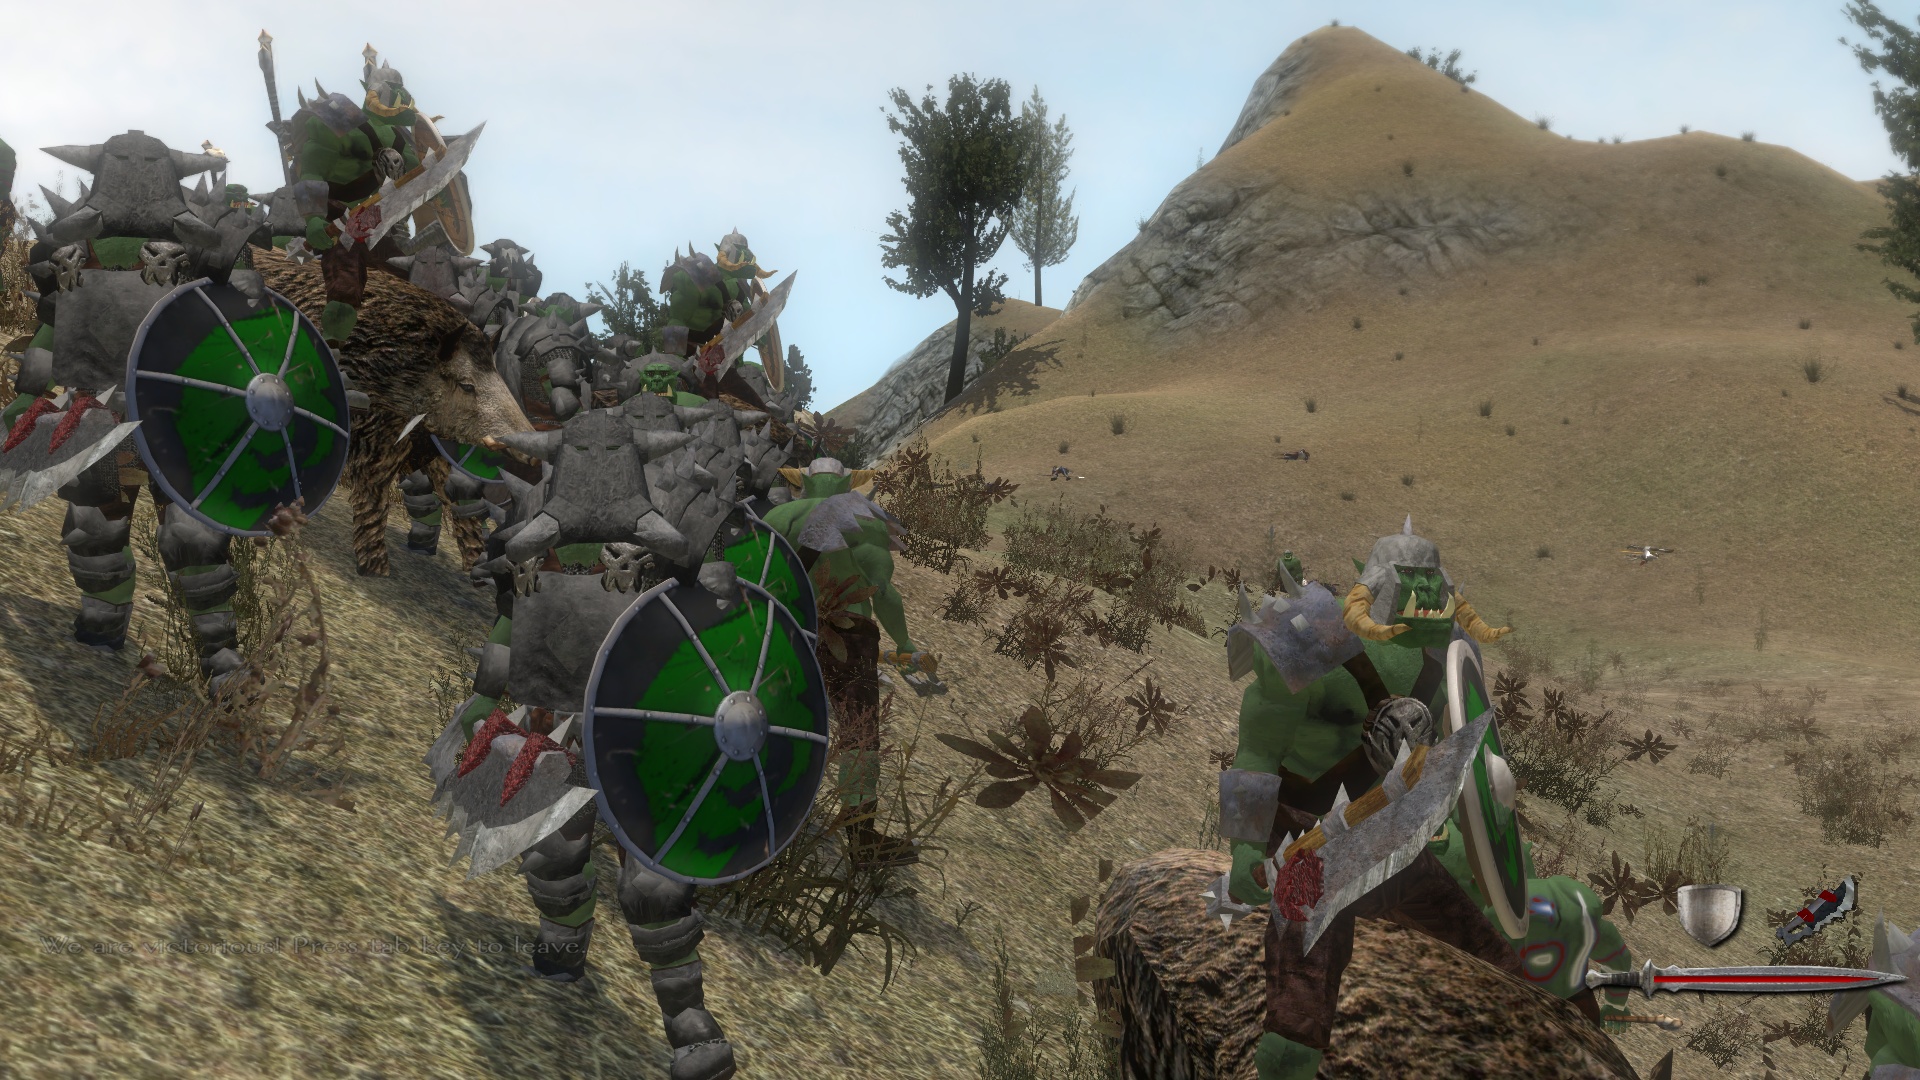 warsword conquest mount and blade warband mod